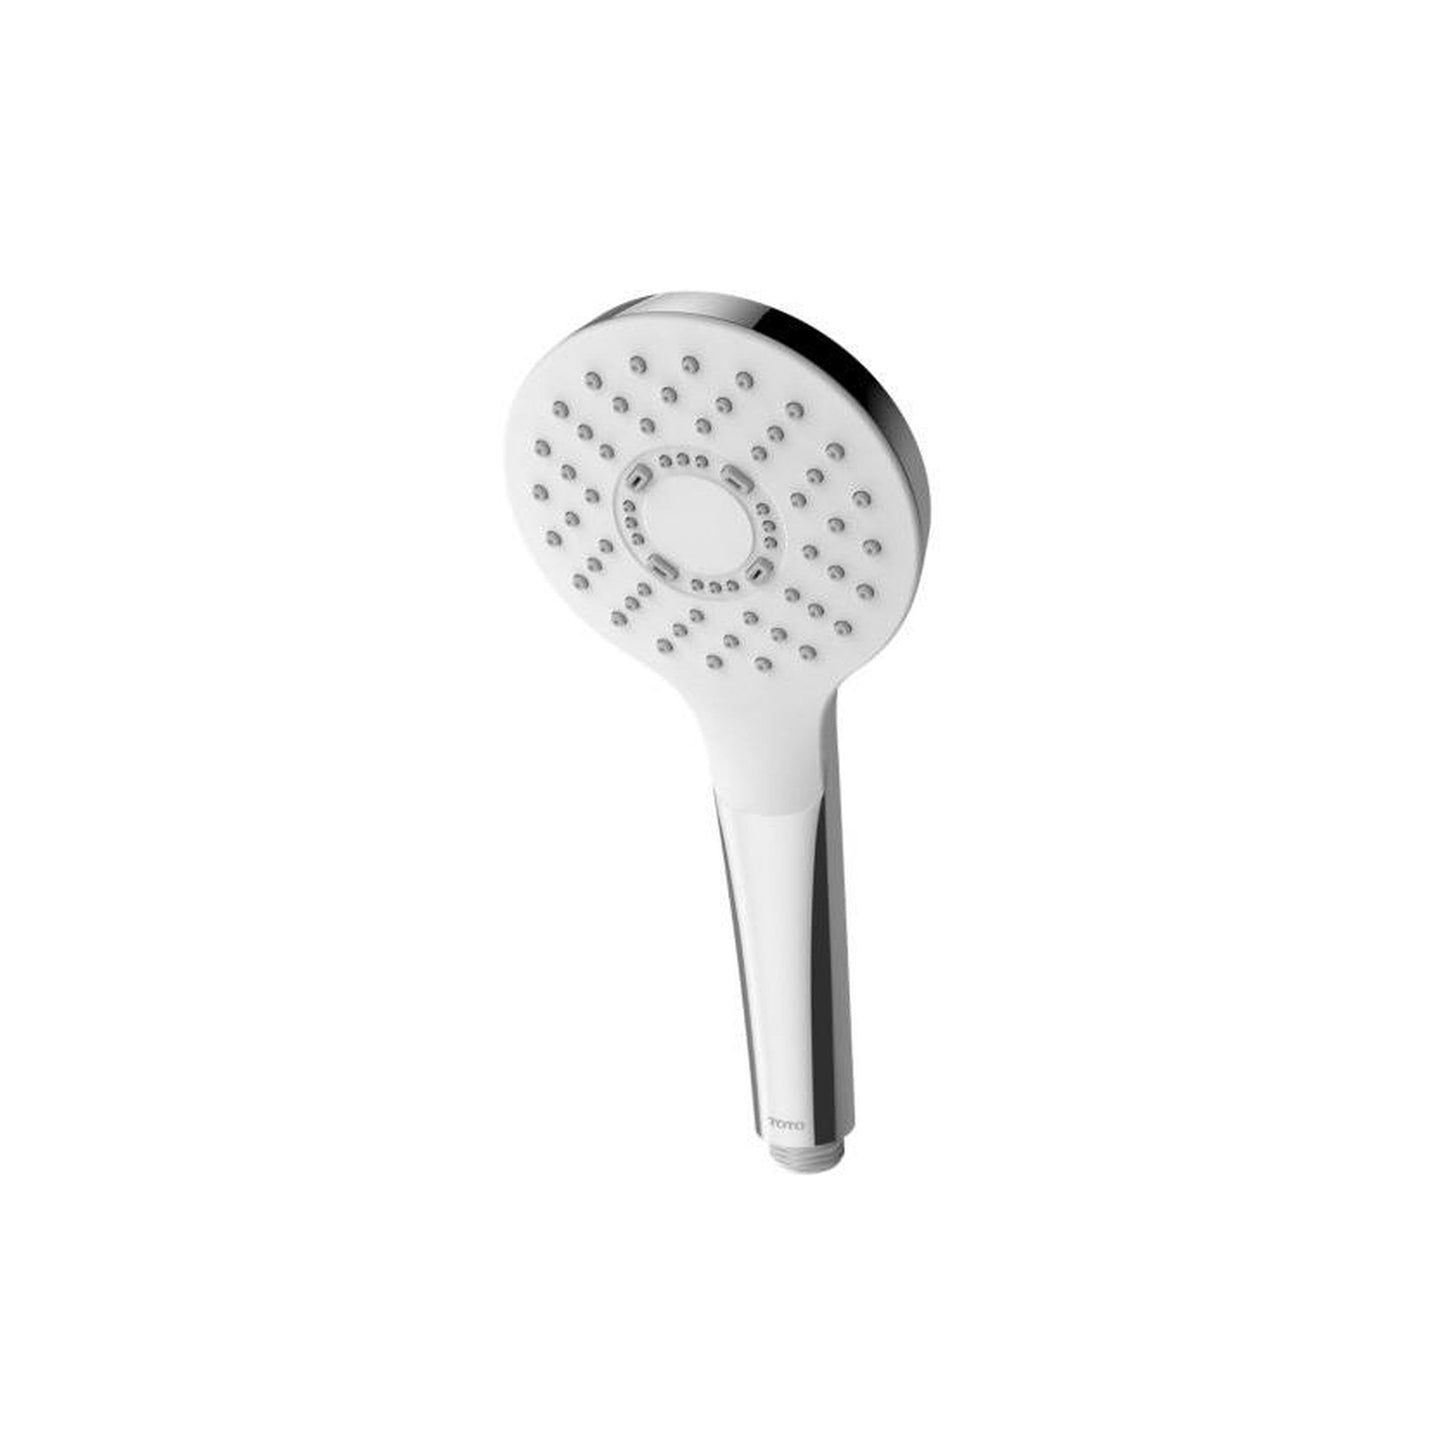 Toto Hs,1 Mode,1.75GPM,G,Round Polished Chrome